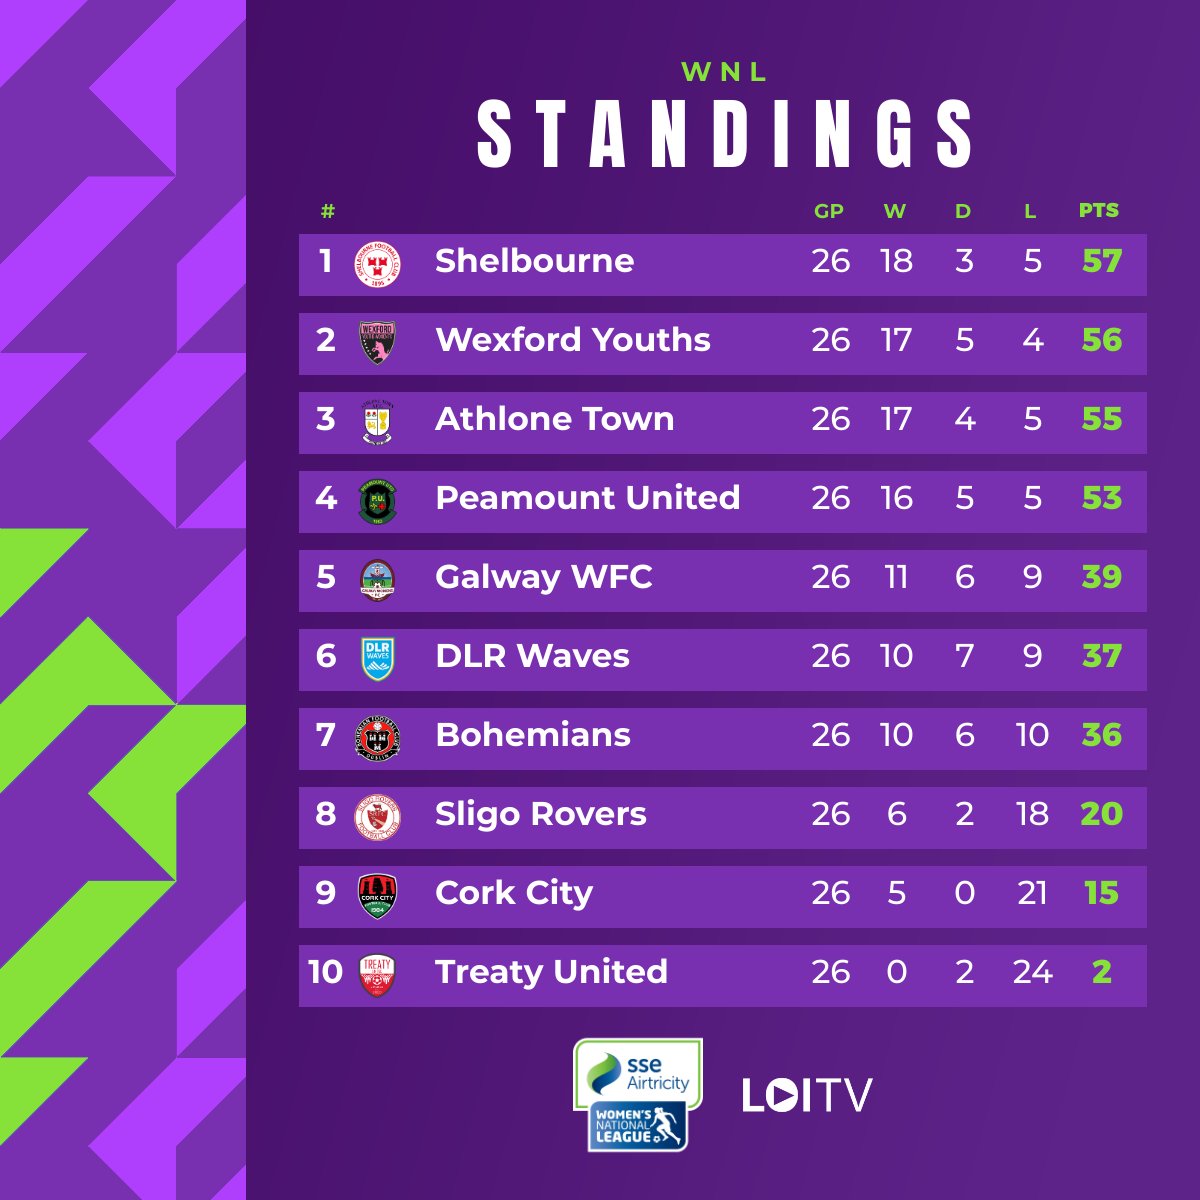 And then there were three! ▪️ A Shels or Wexford win next week will crown either team Champions ▪️ A Shels and Wexford draw coupled with an Athlone win gives a Shels-Athlone Play-Off 😅 ▪️ A Wexford-Shels draw coupled with Athlone loss/draw crowns Shels Champions